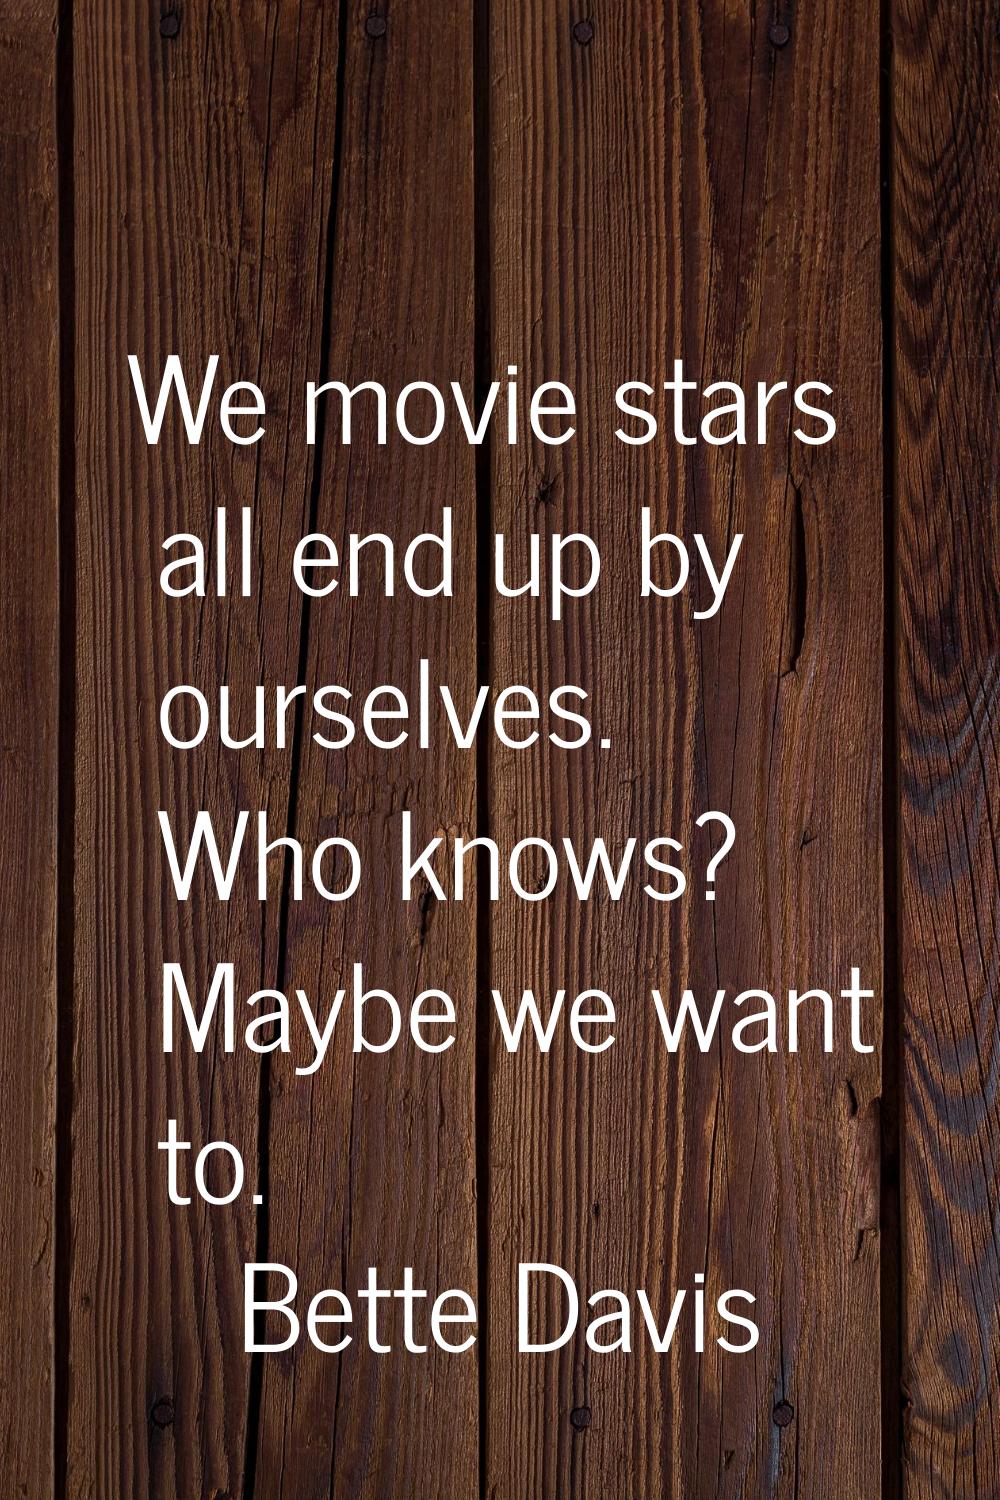 We movie stars all end up by ourselves. Who knows? Maybe we want to.